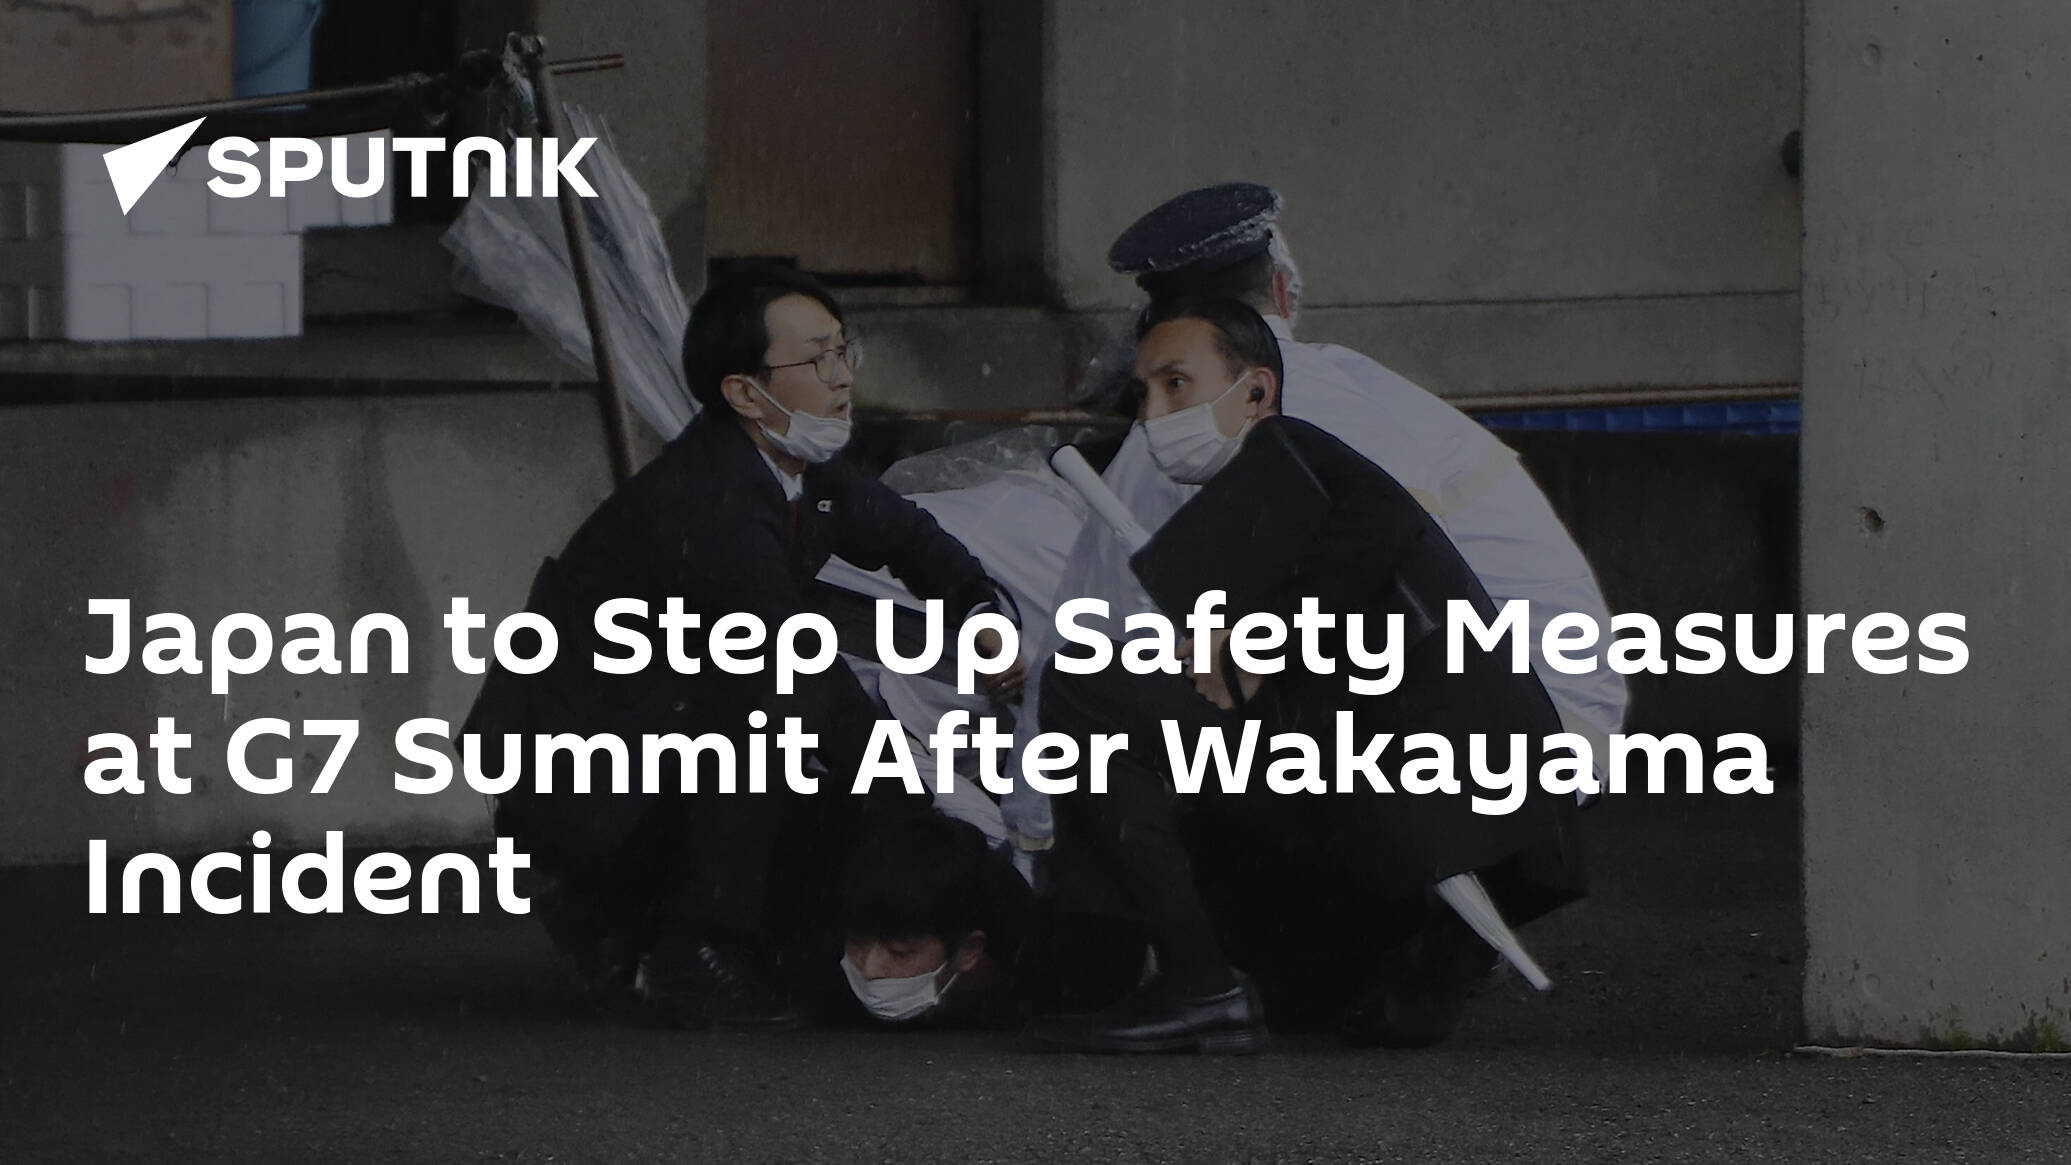 Japan to Step Up Safety Measures at G7 Summit After Wakayama Incident